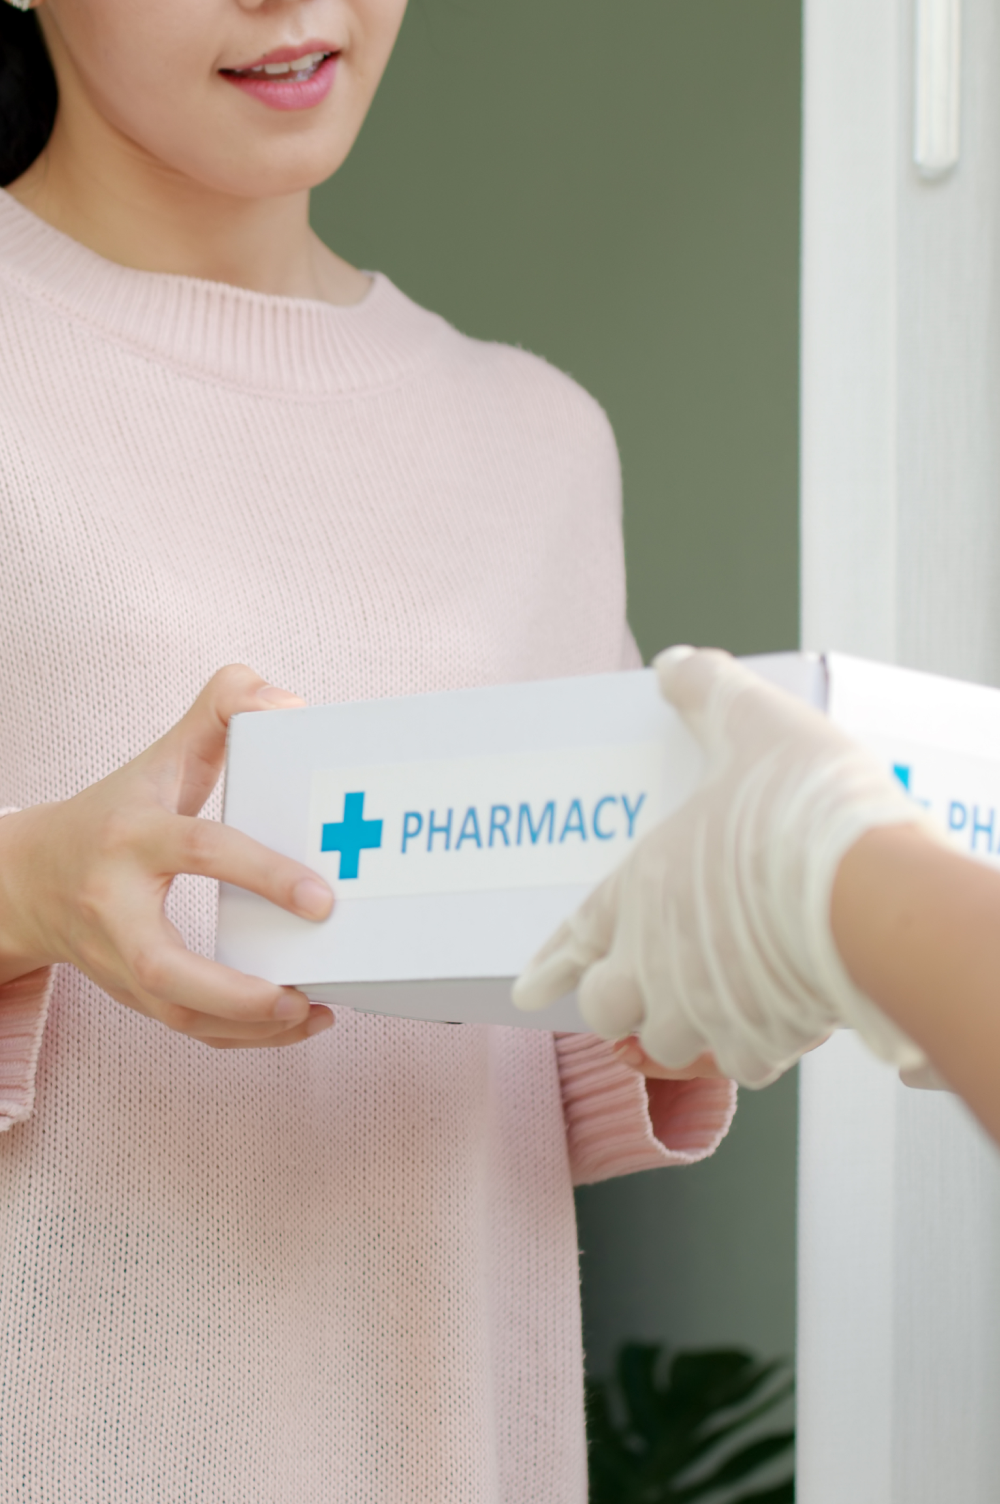 Woman receiving pharmacy subscription box from delivery person wearing gloves